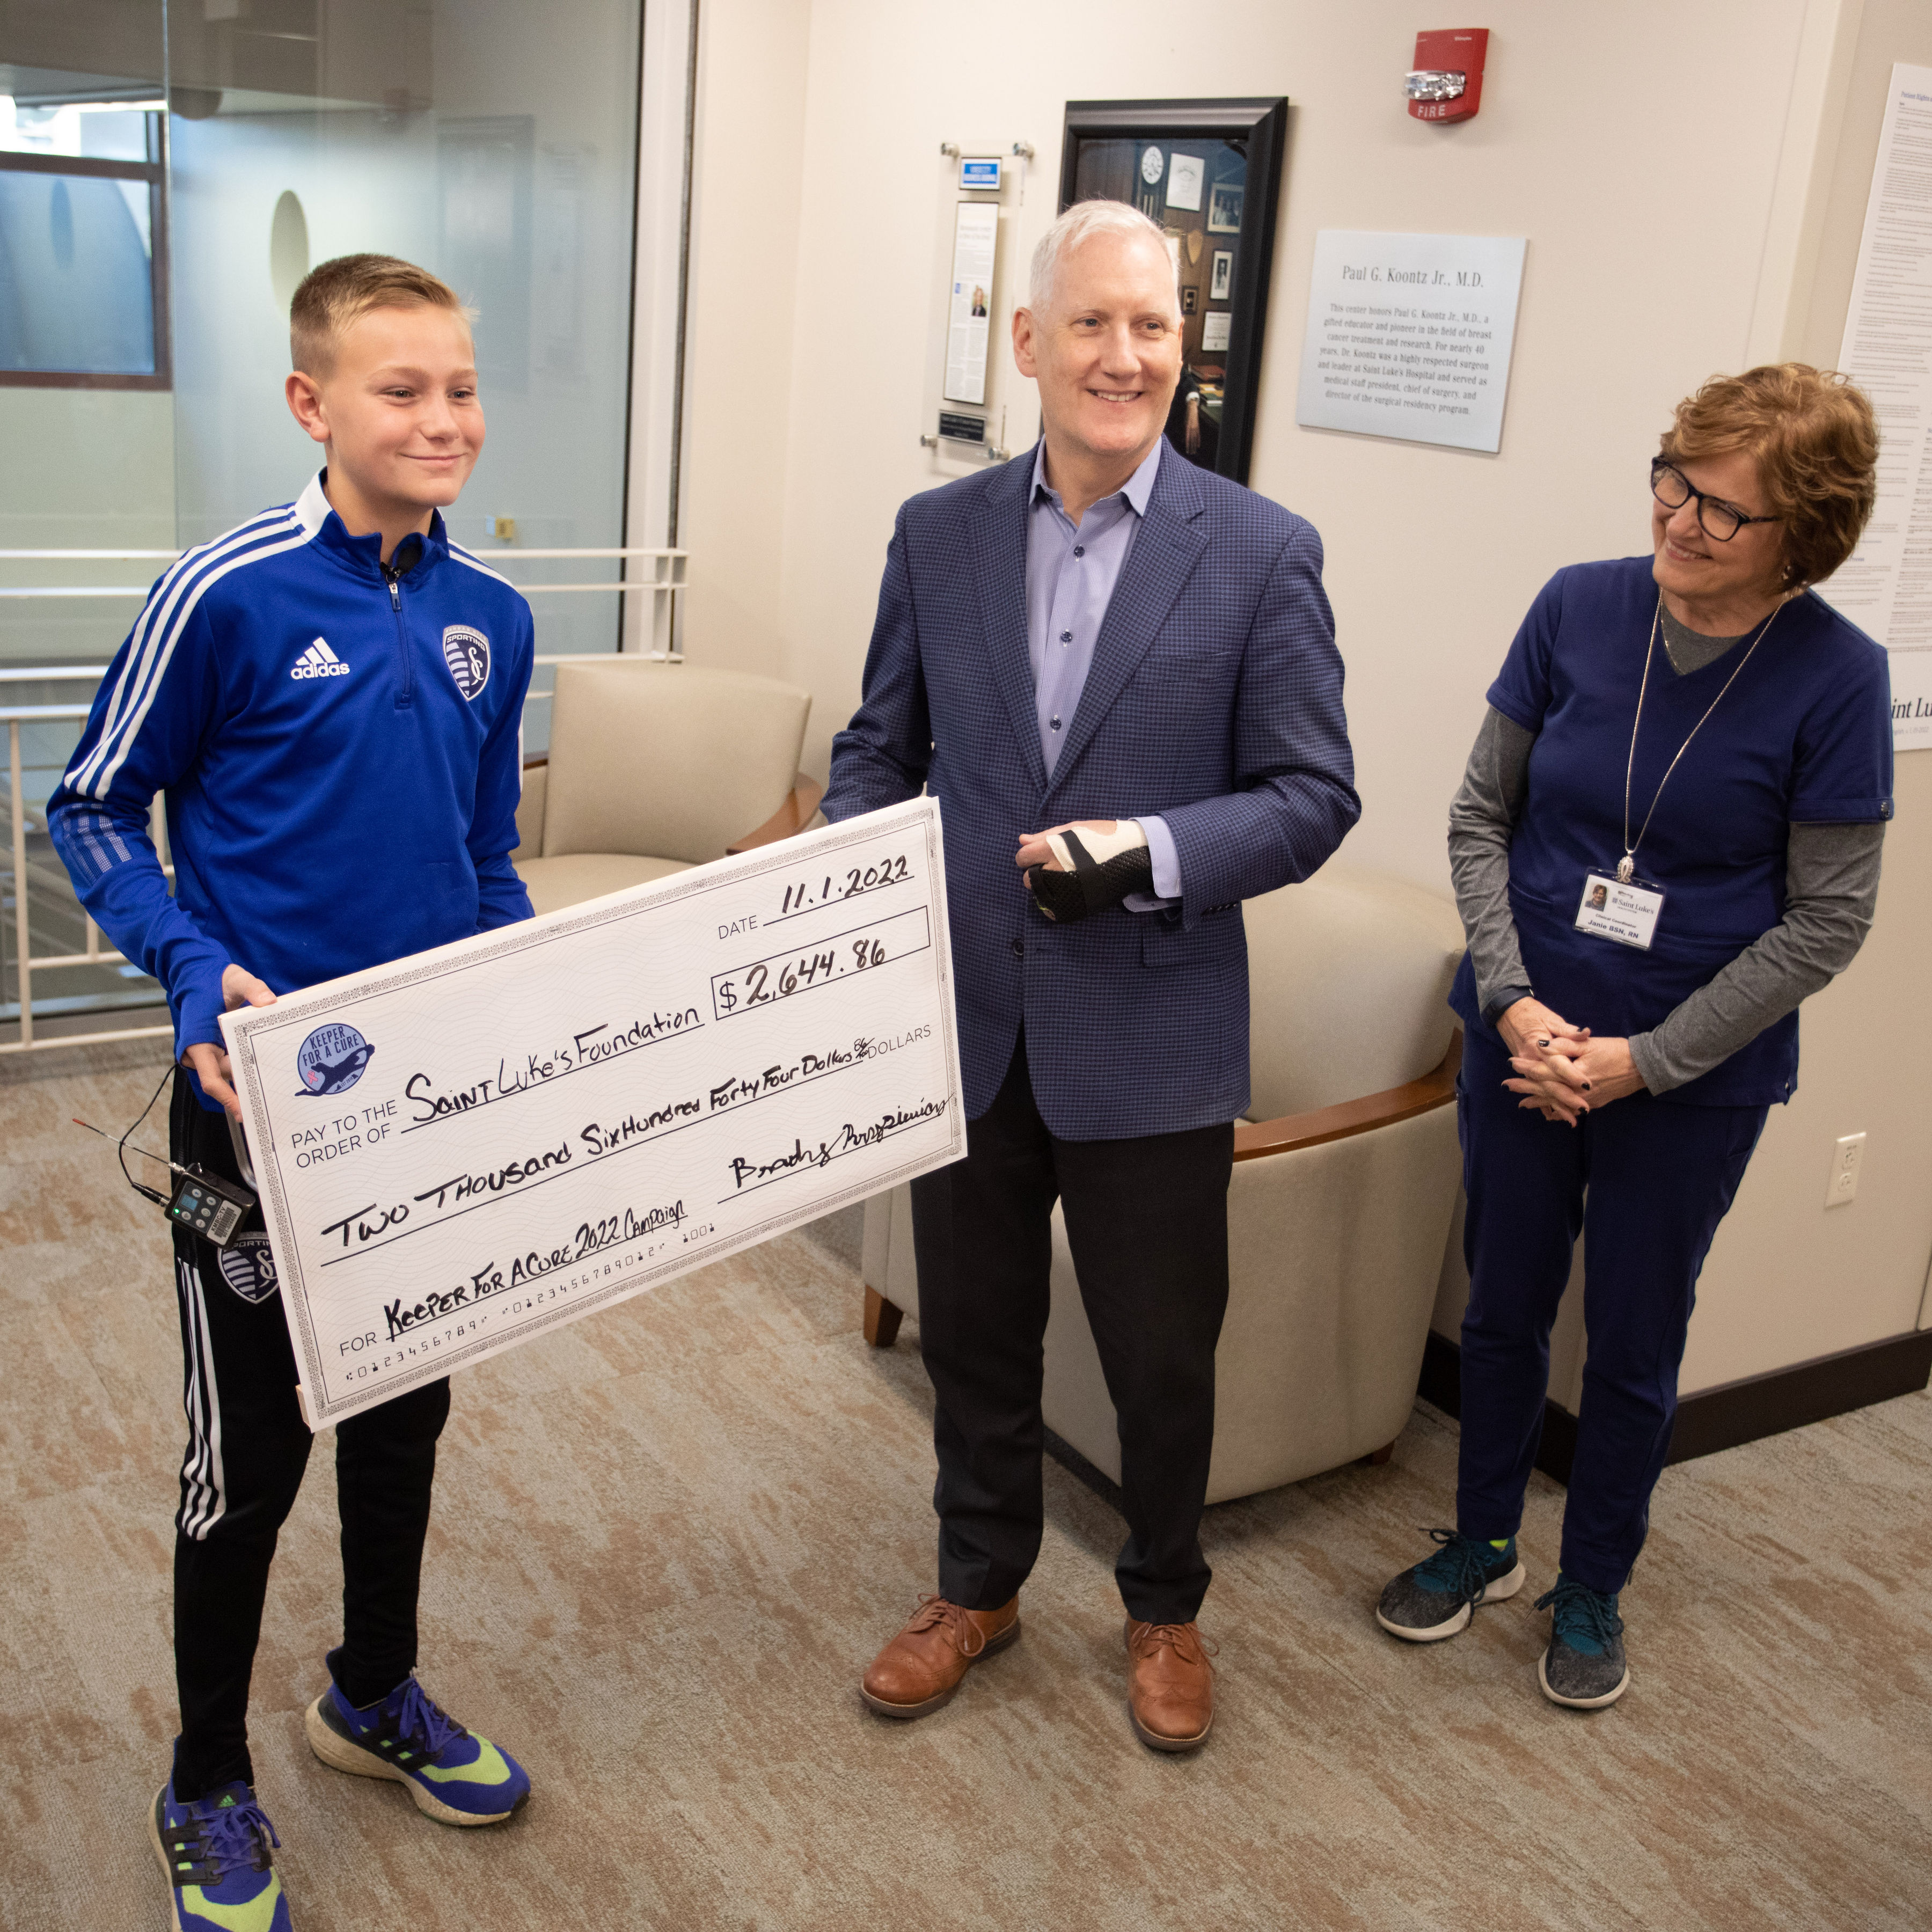 Brady Krysiewicz, a 12-year-old goalkeeper at Sporting Kansas City Academy, started Keeper for a Cure to raise money for women fighting breast cancer. He donates to the Saint Luke's Hospital Koontz Center for Advanced Breast Cancer for its annual Journey of Courage and Hope Retreat.